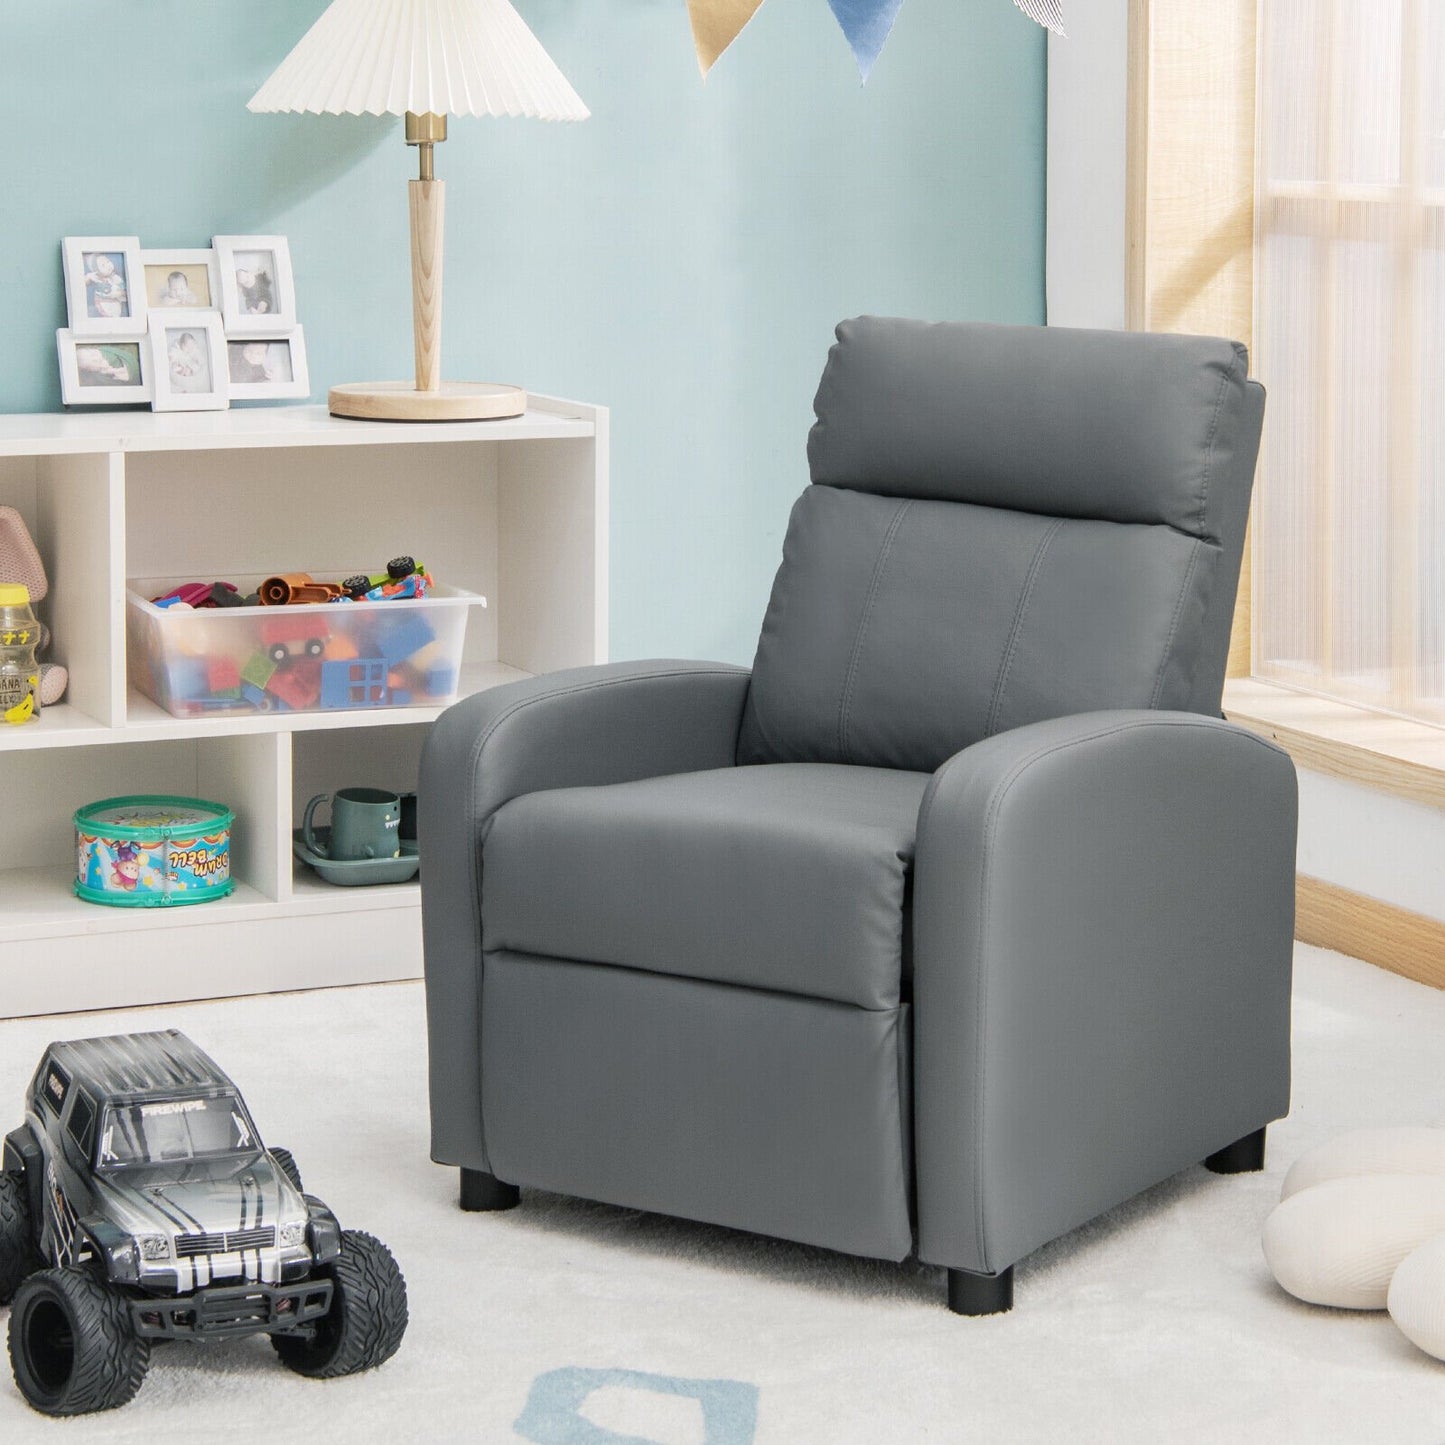 Ergonomic PU Leather Kids Recliner Lounge Sofa for 3-12 Age Group, Gray - Gallery Canada